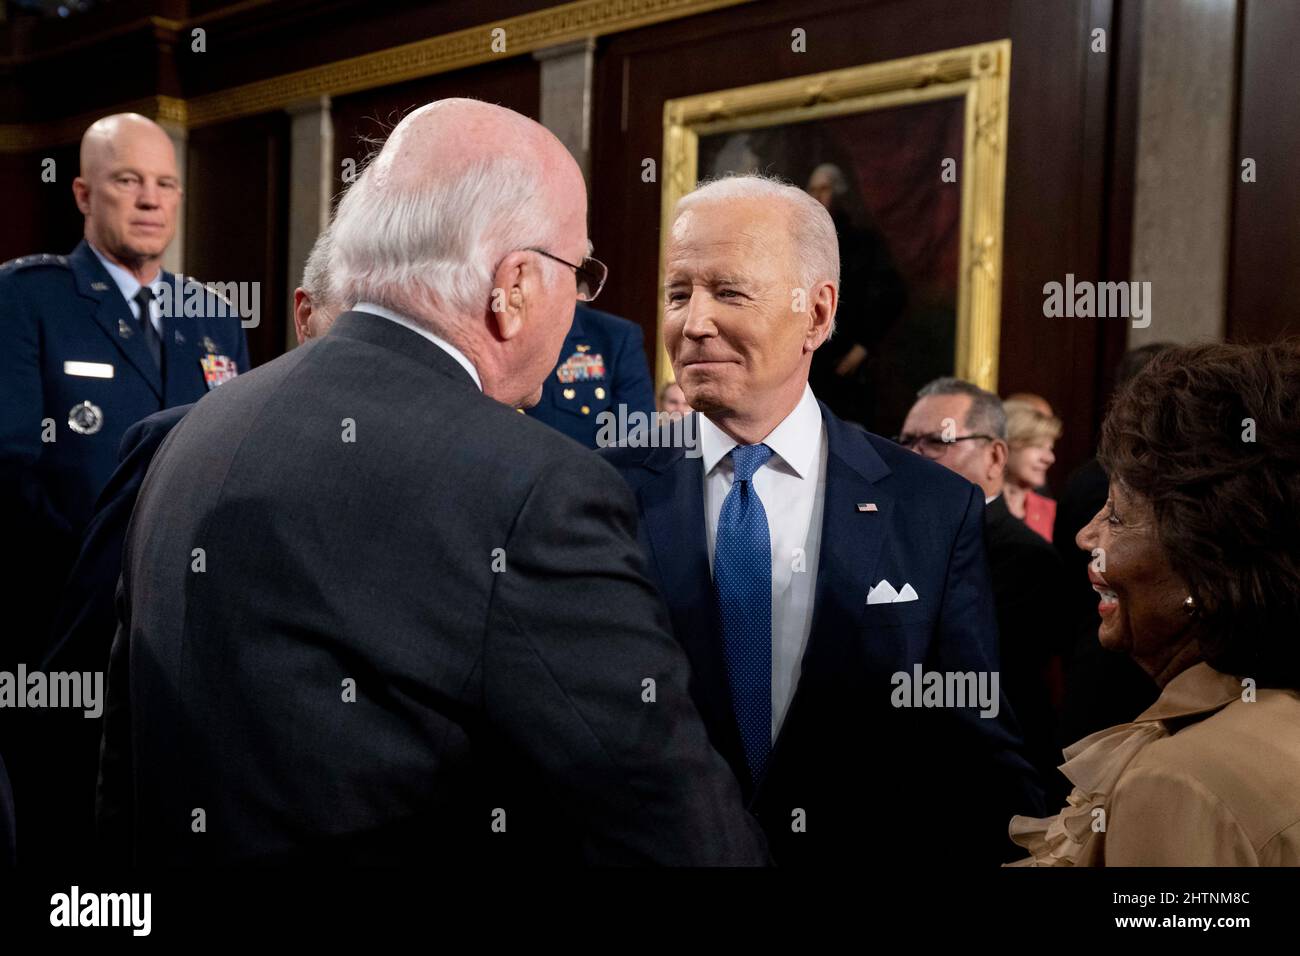 US President Joe Biden (C) speaks to Senator Patrick Leahy (D-VT) after delivering the State of the Union address to a joint session of Congress at the US Capitol in Washington, DC, USA on March 1, 2022. Photo by Saul Loeb/Pool/ABACAPRESS.COM Stock Photo